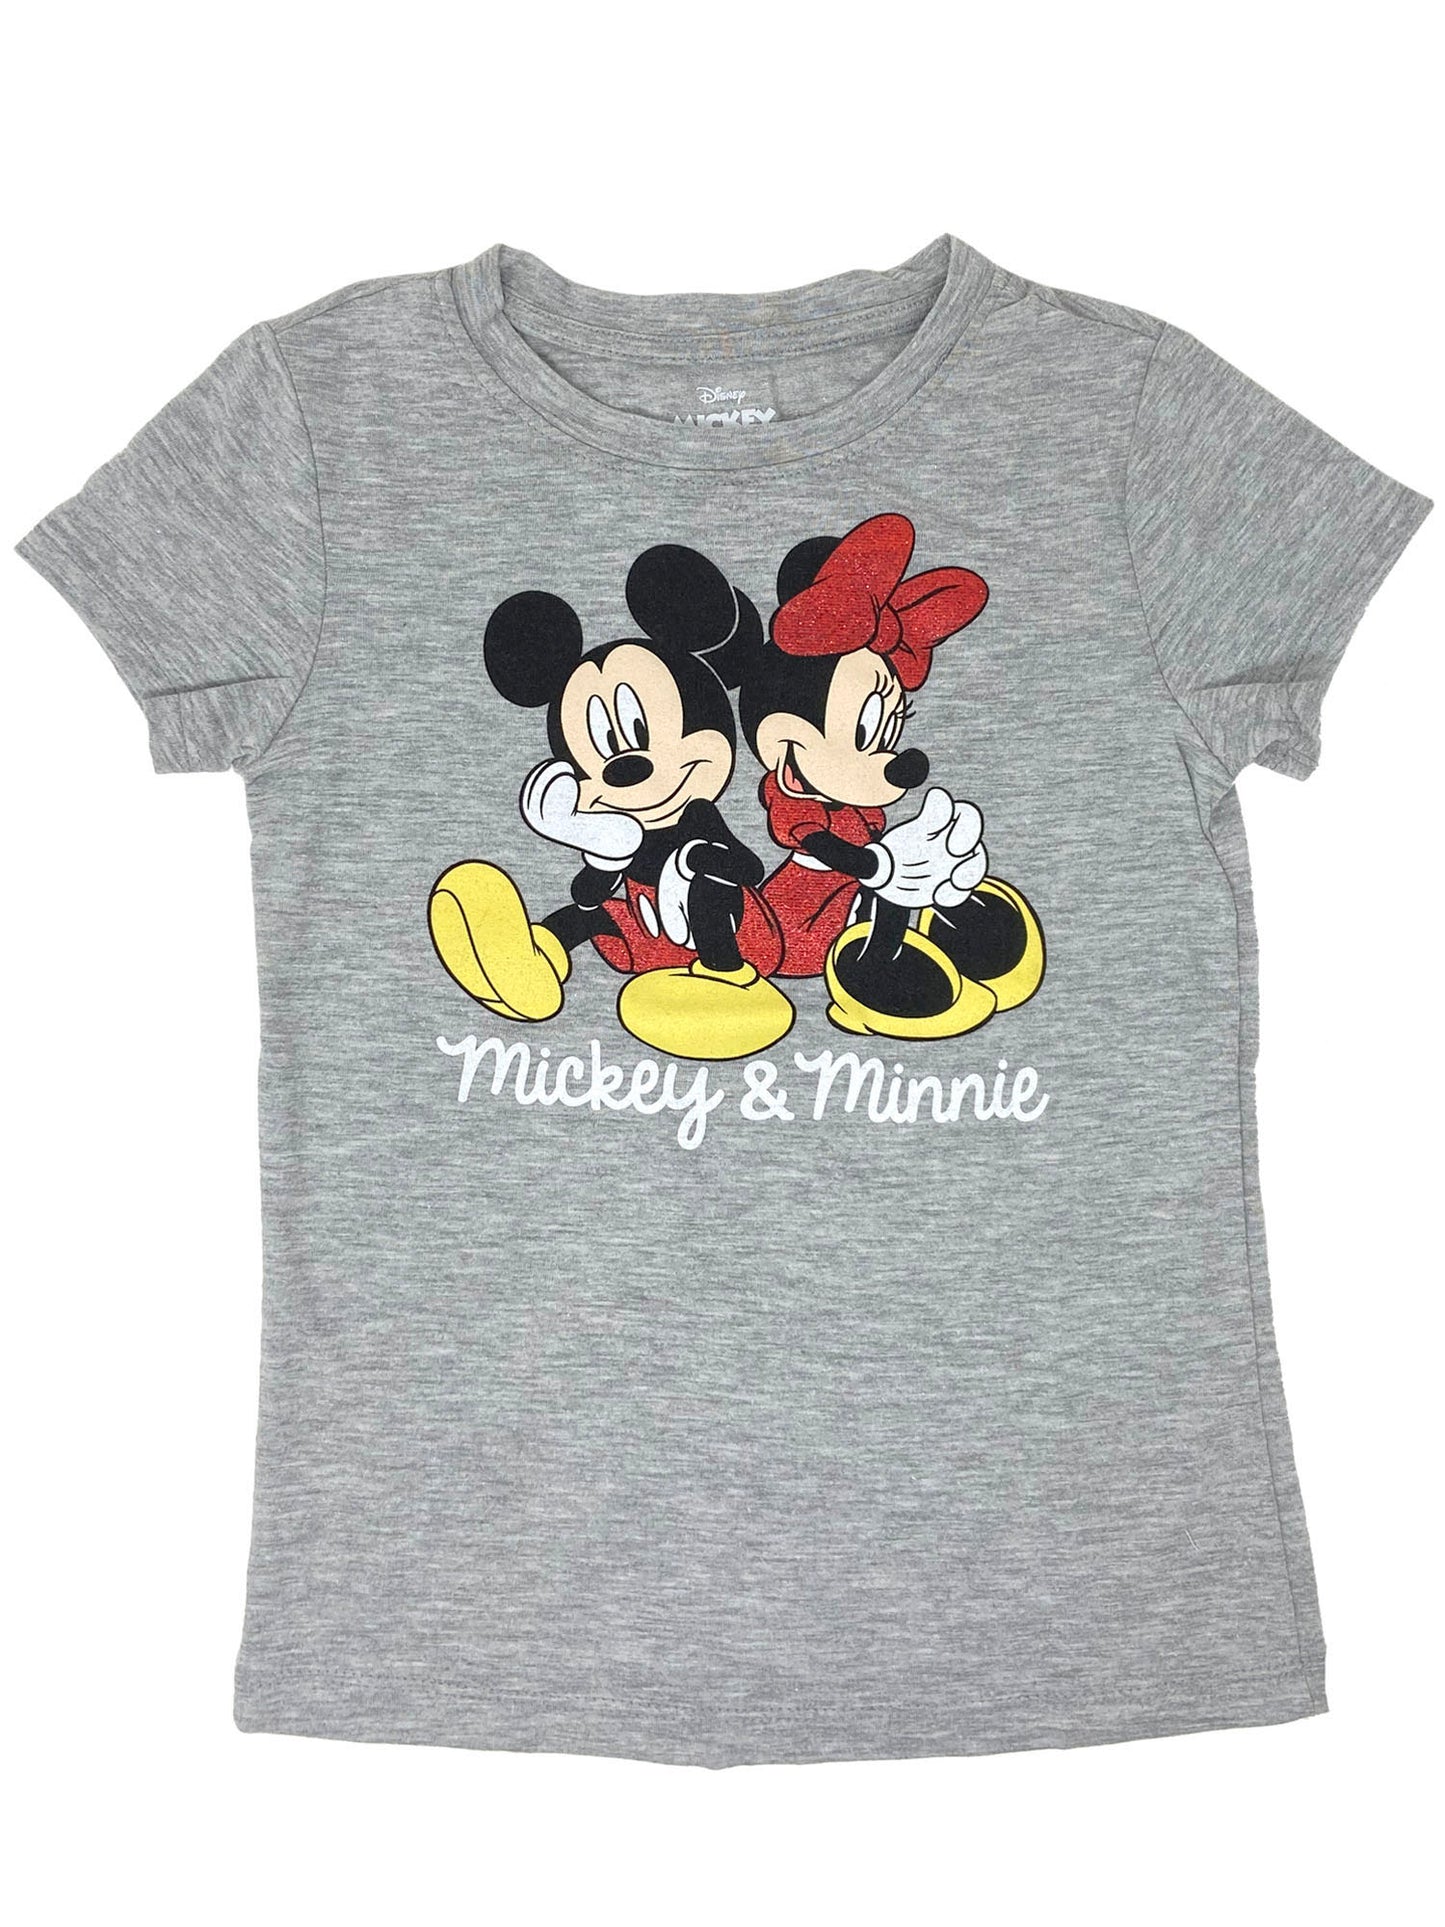 Disney Girls Mickey & Minnie Mouse Cap Sleeves T-Shirt (Extra Small Only)